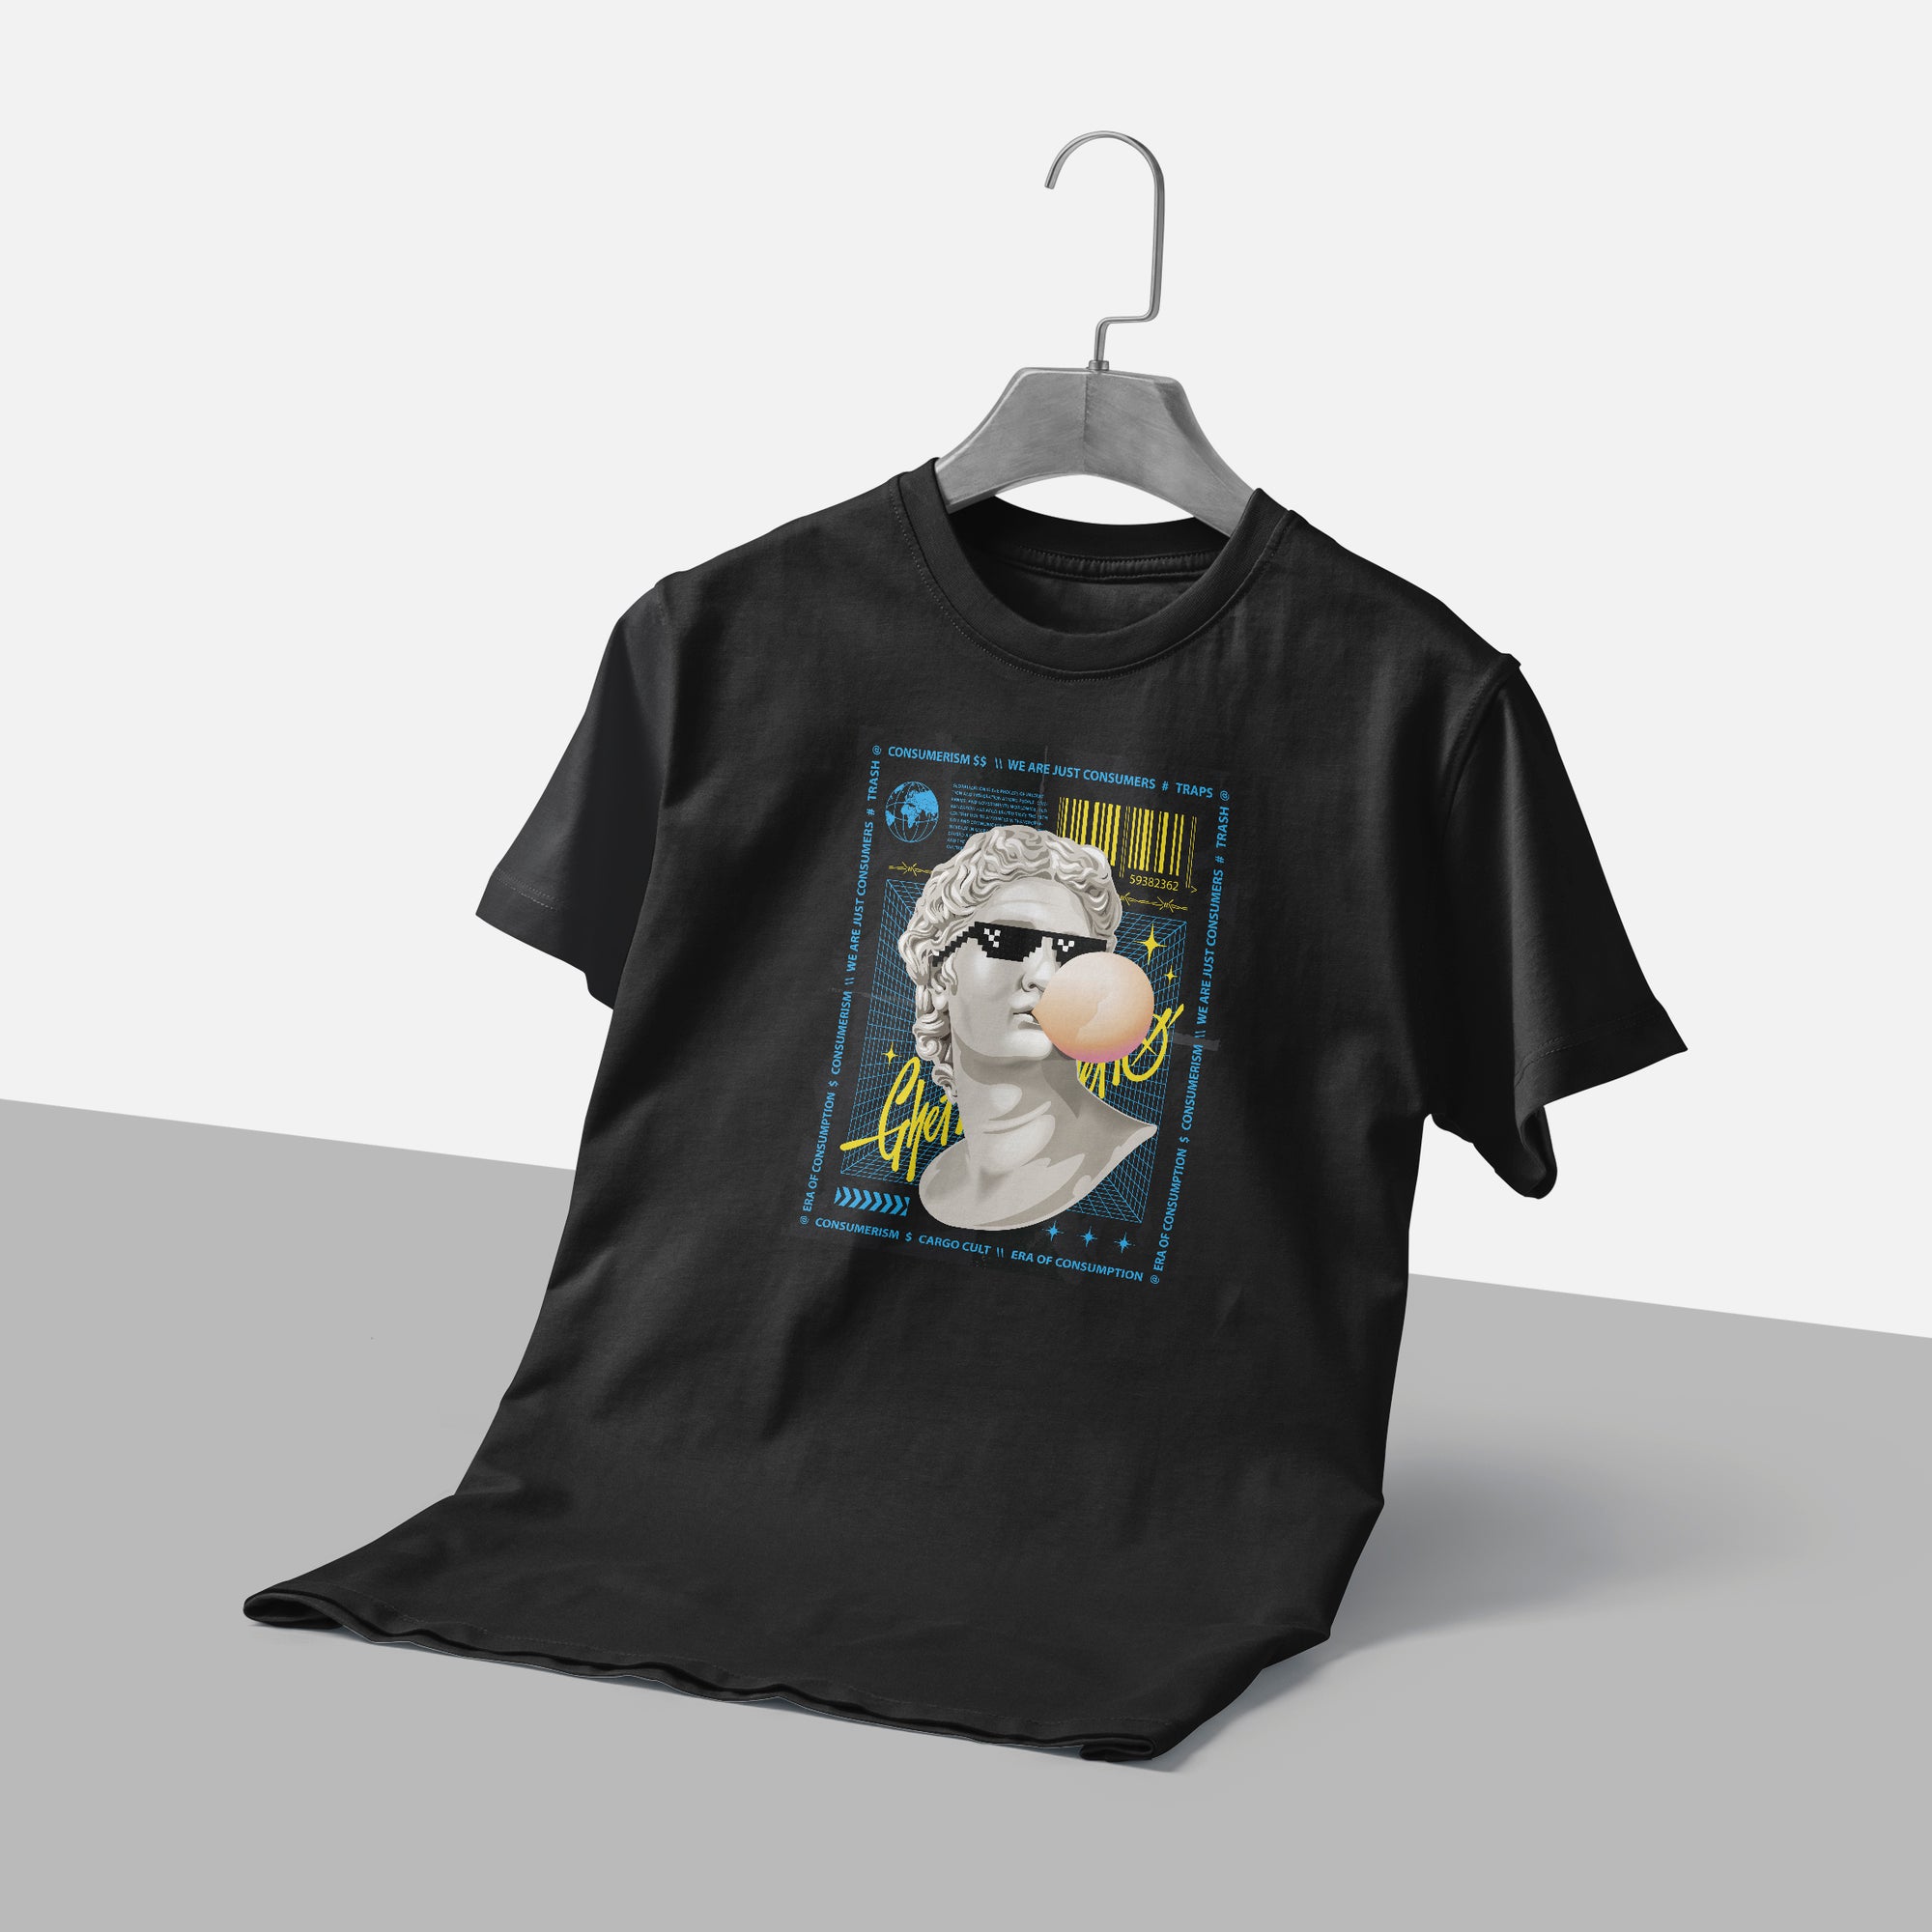 Artistic-tees-for-women